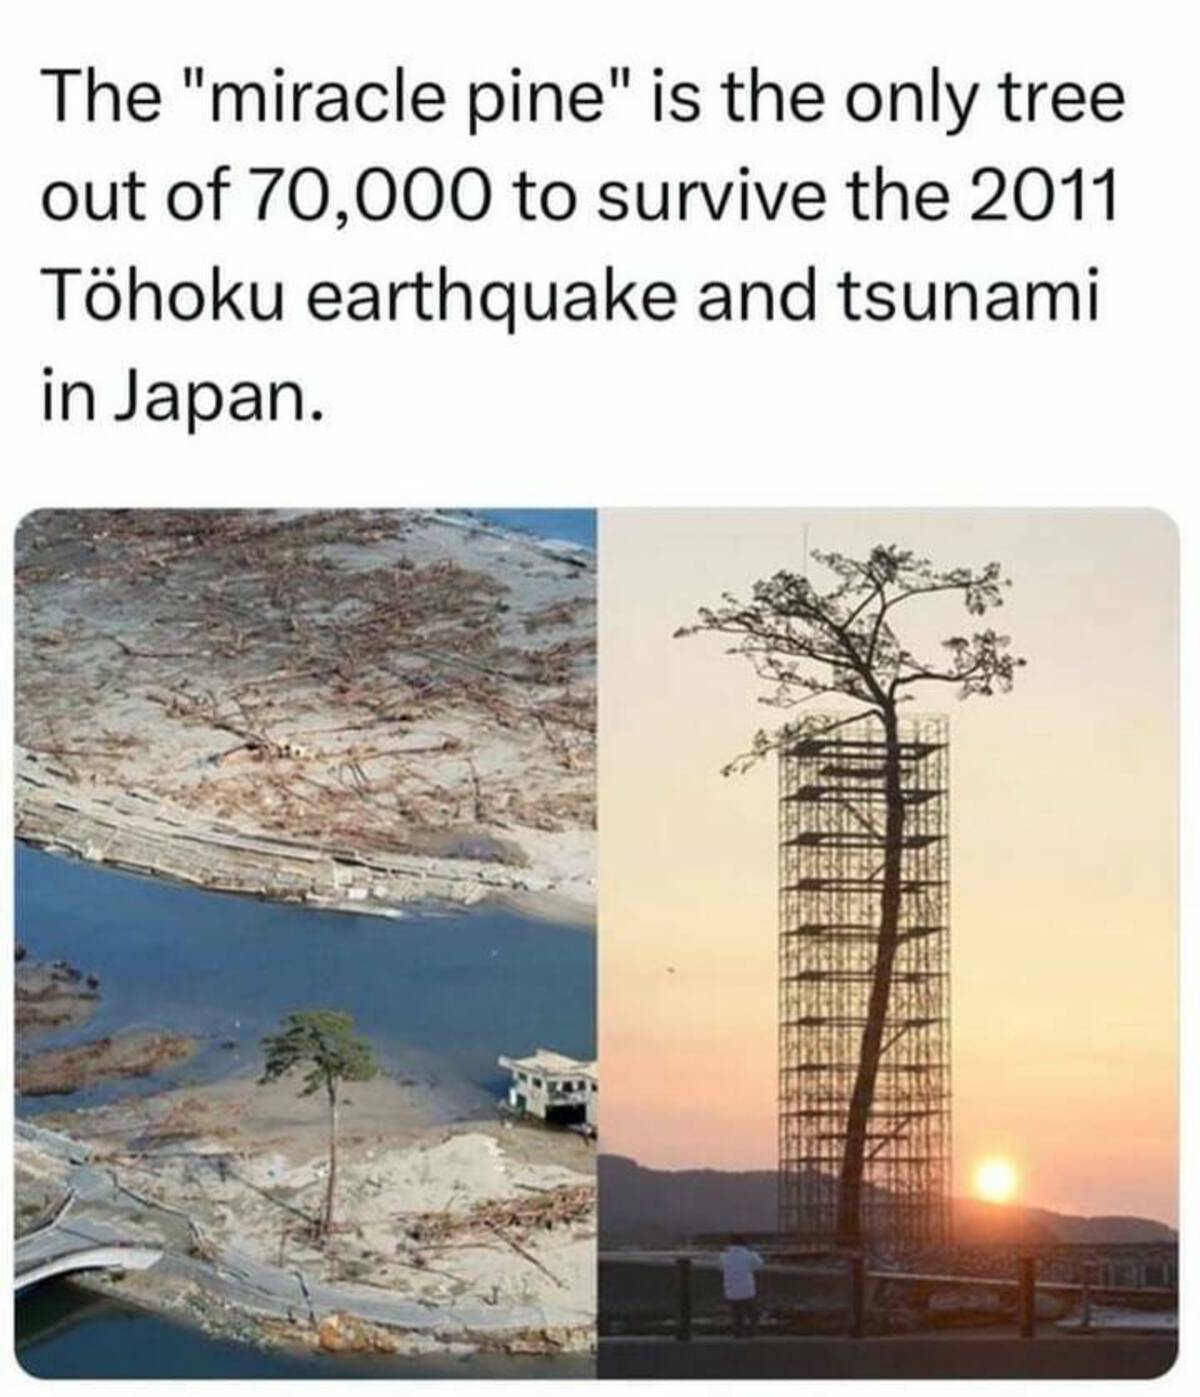 tree scaffolding - The "miracle pine" is the only tree out of 70,000 to survive the 2011 Thoku earthquake and tsunami in Japan.